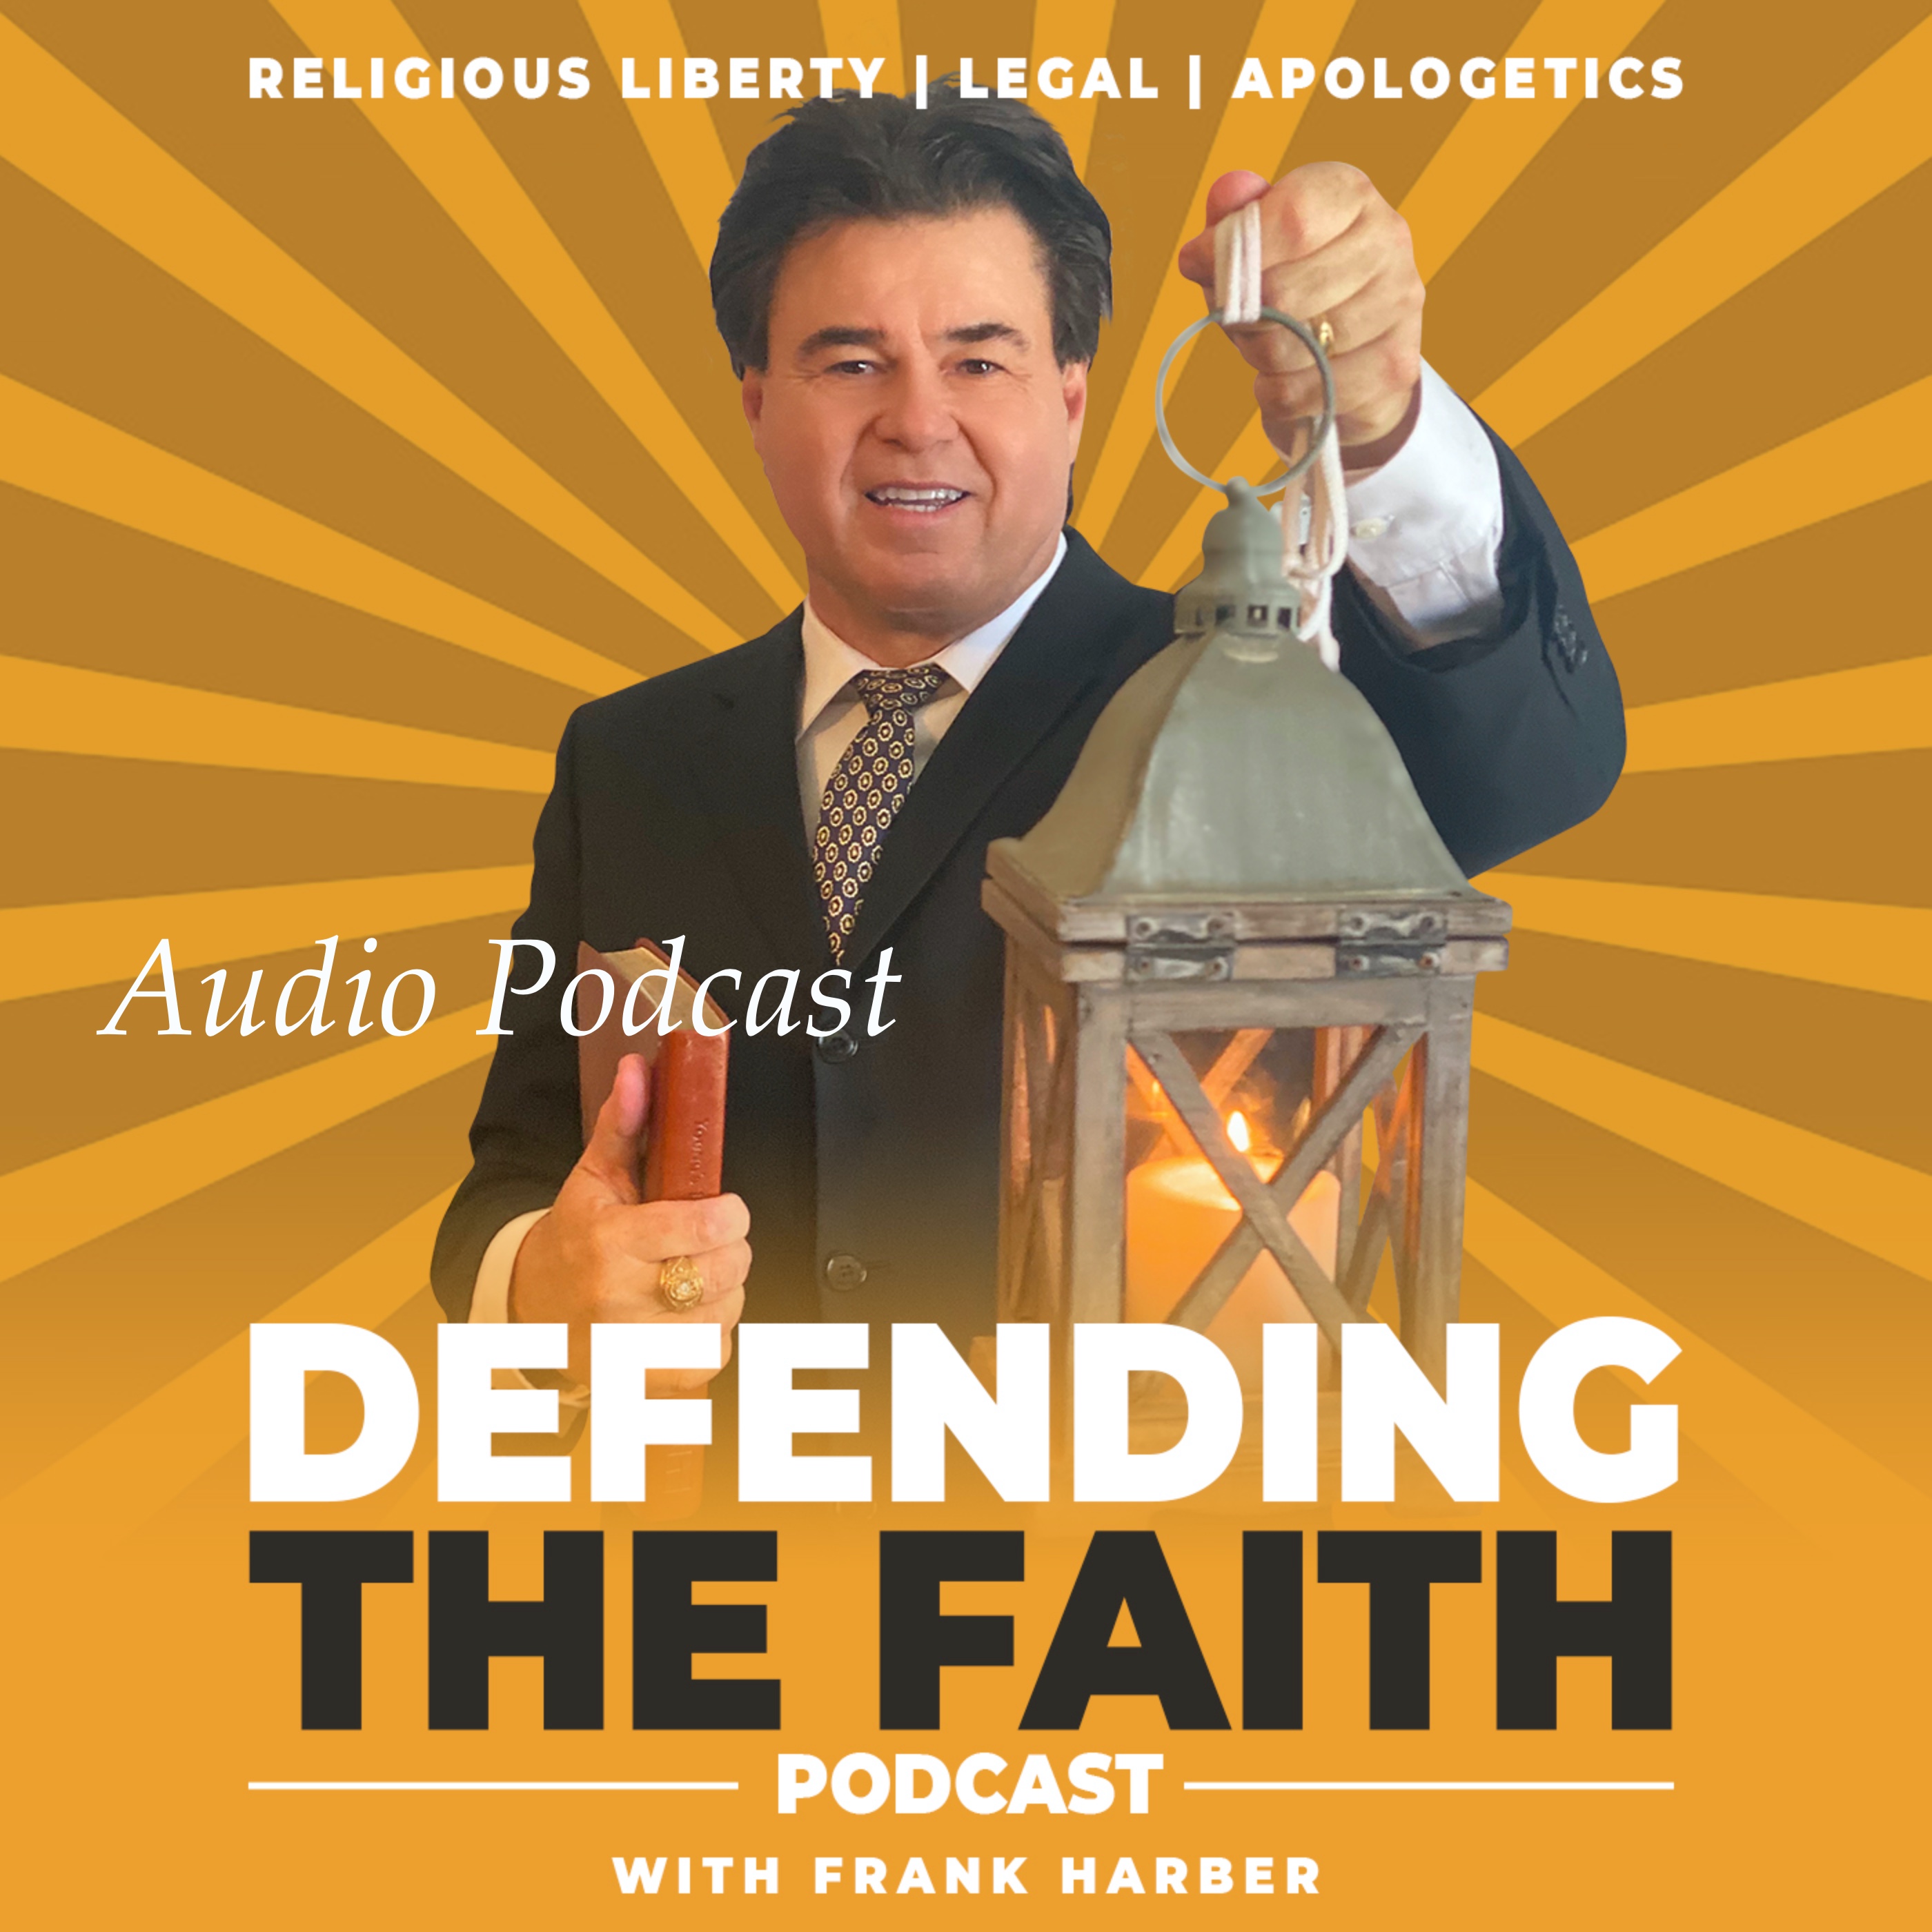 Defending The Faith with Frank Harber Audio Podcast